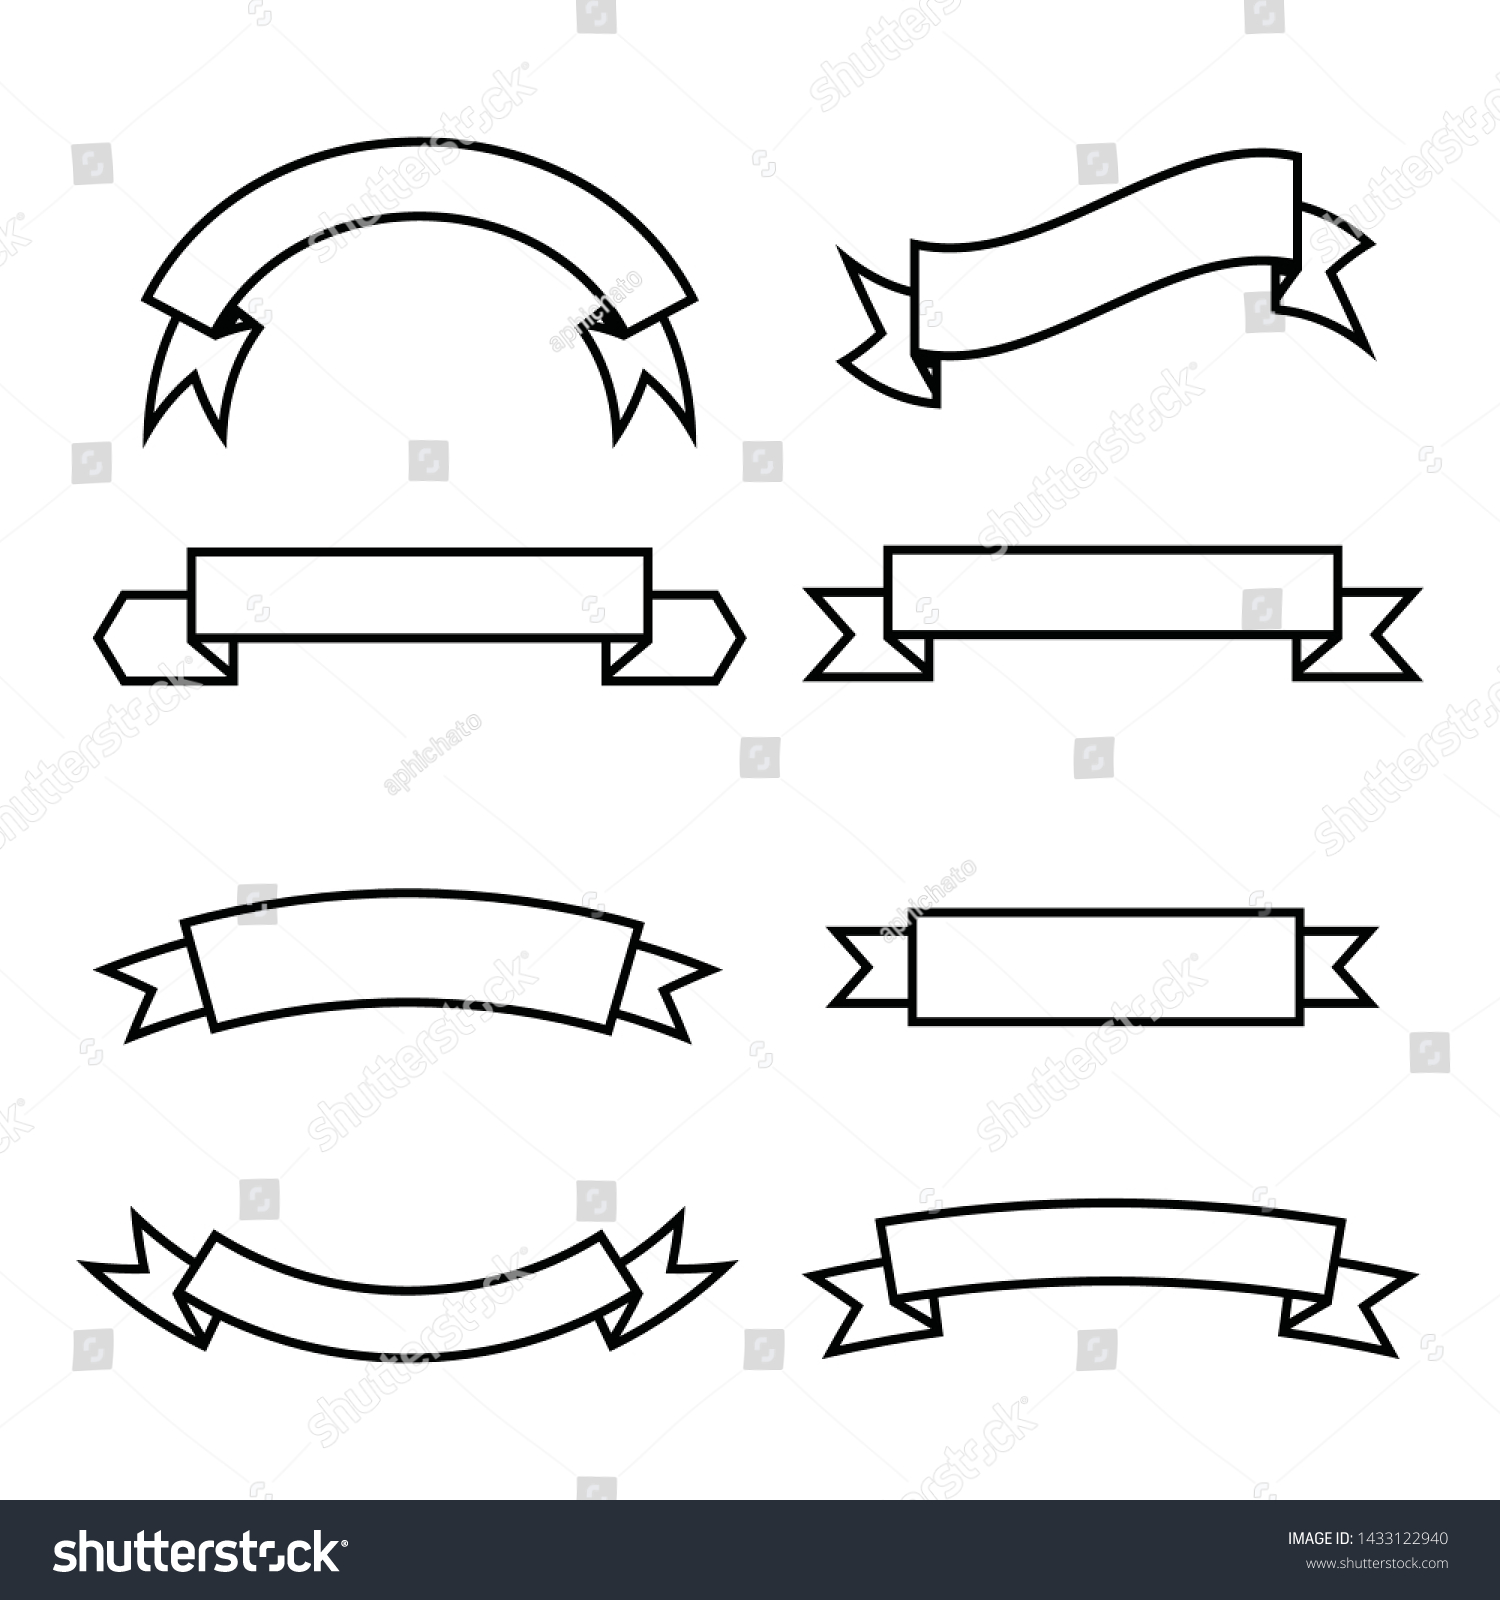 12,640 Arched ribbon banner Images, Stock Photos & Vectors | Shutterstock